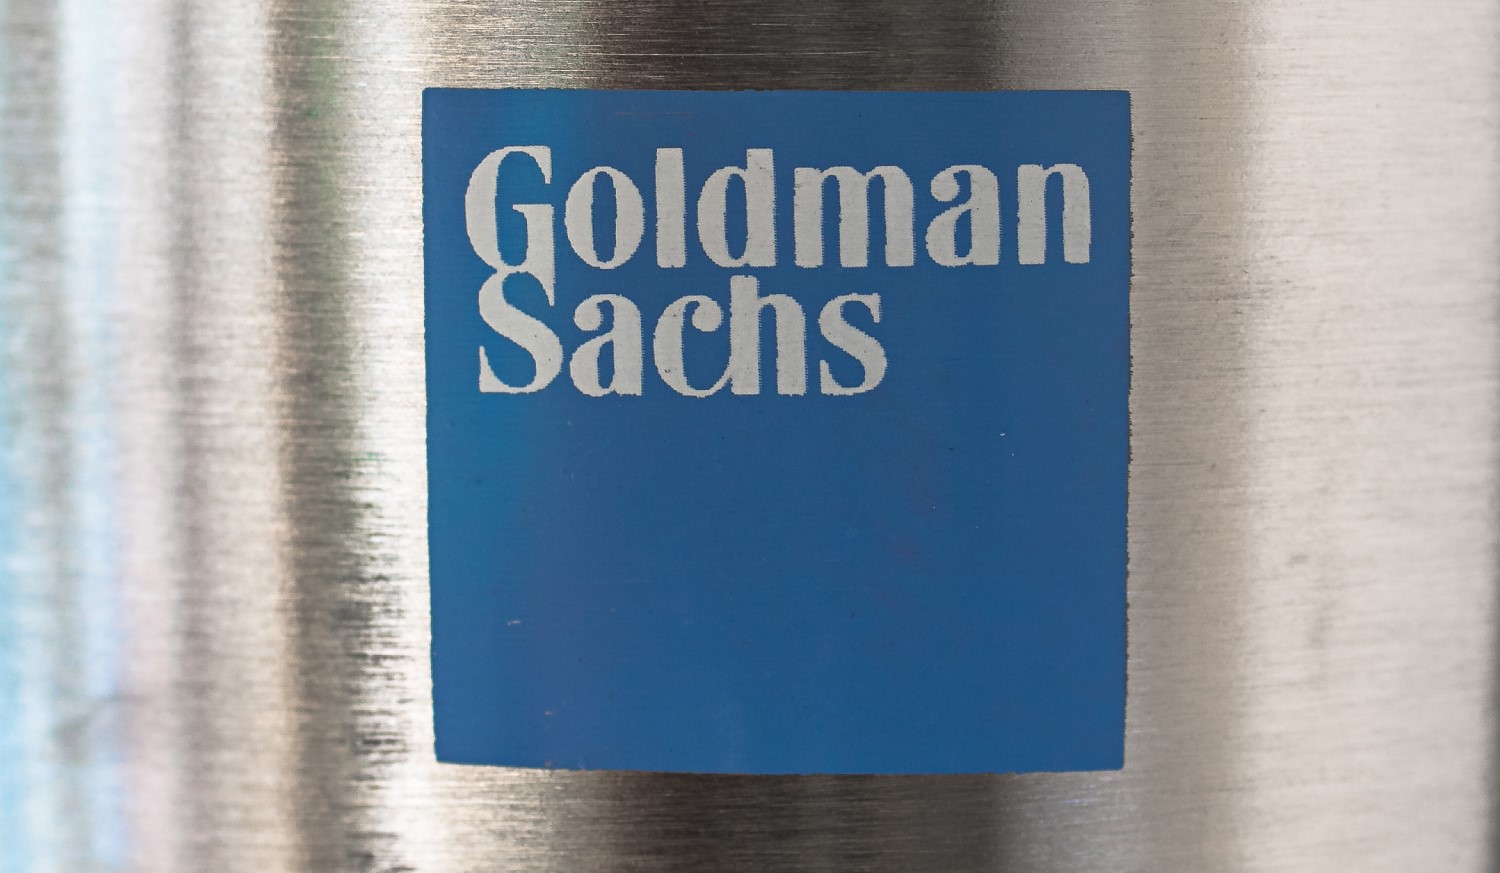 Goldman Sachs Analysts’ Note Says Now’s A Good Time To Buy Bitcoin